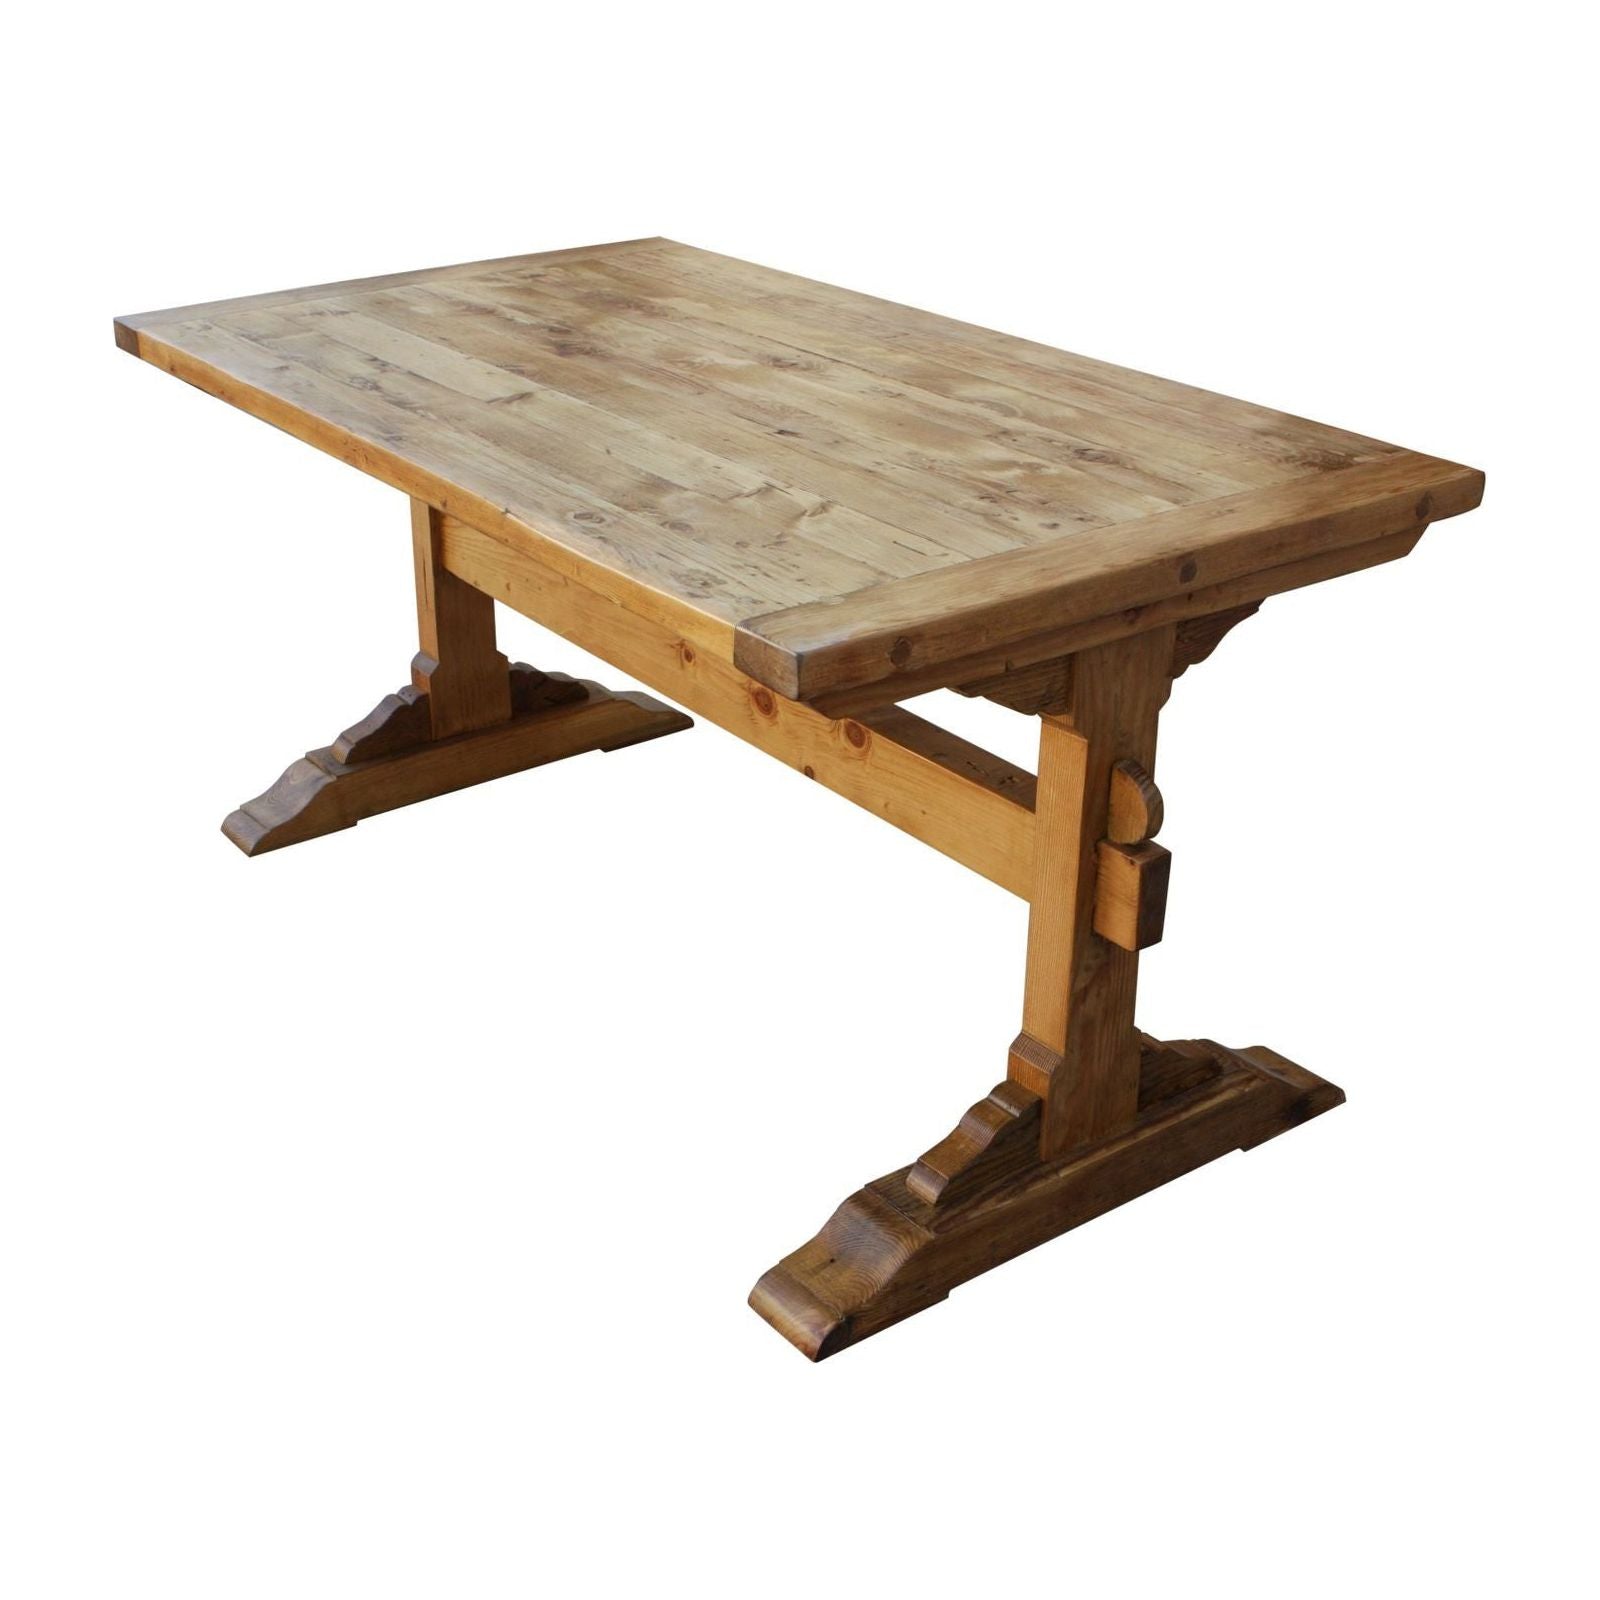 Santa Barbara Dining Trestle Table Built In Reclaimed Lumber Chunky Rustic Contemporary Dining Kitchen Tables